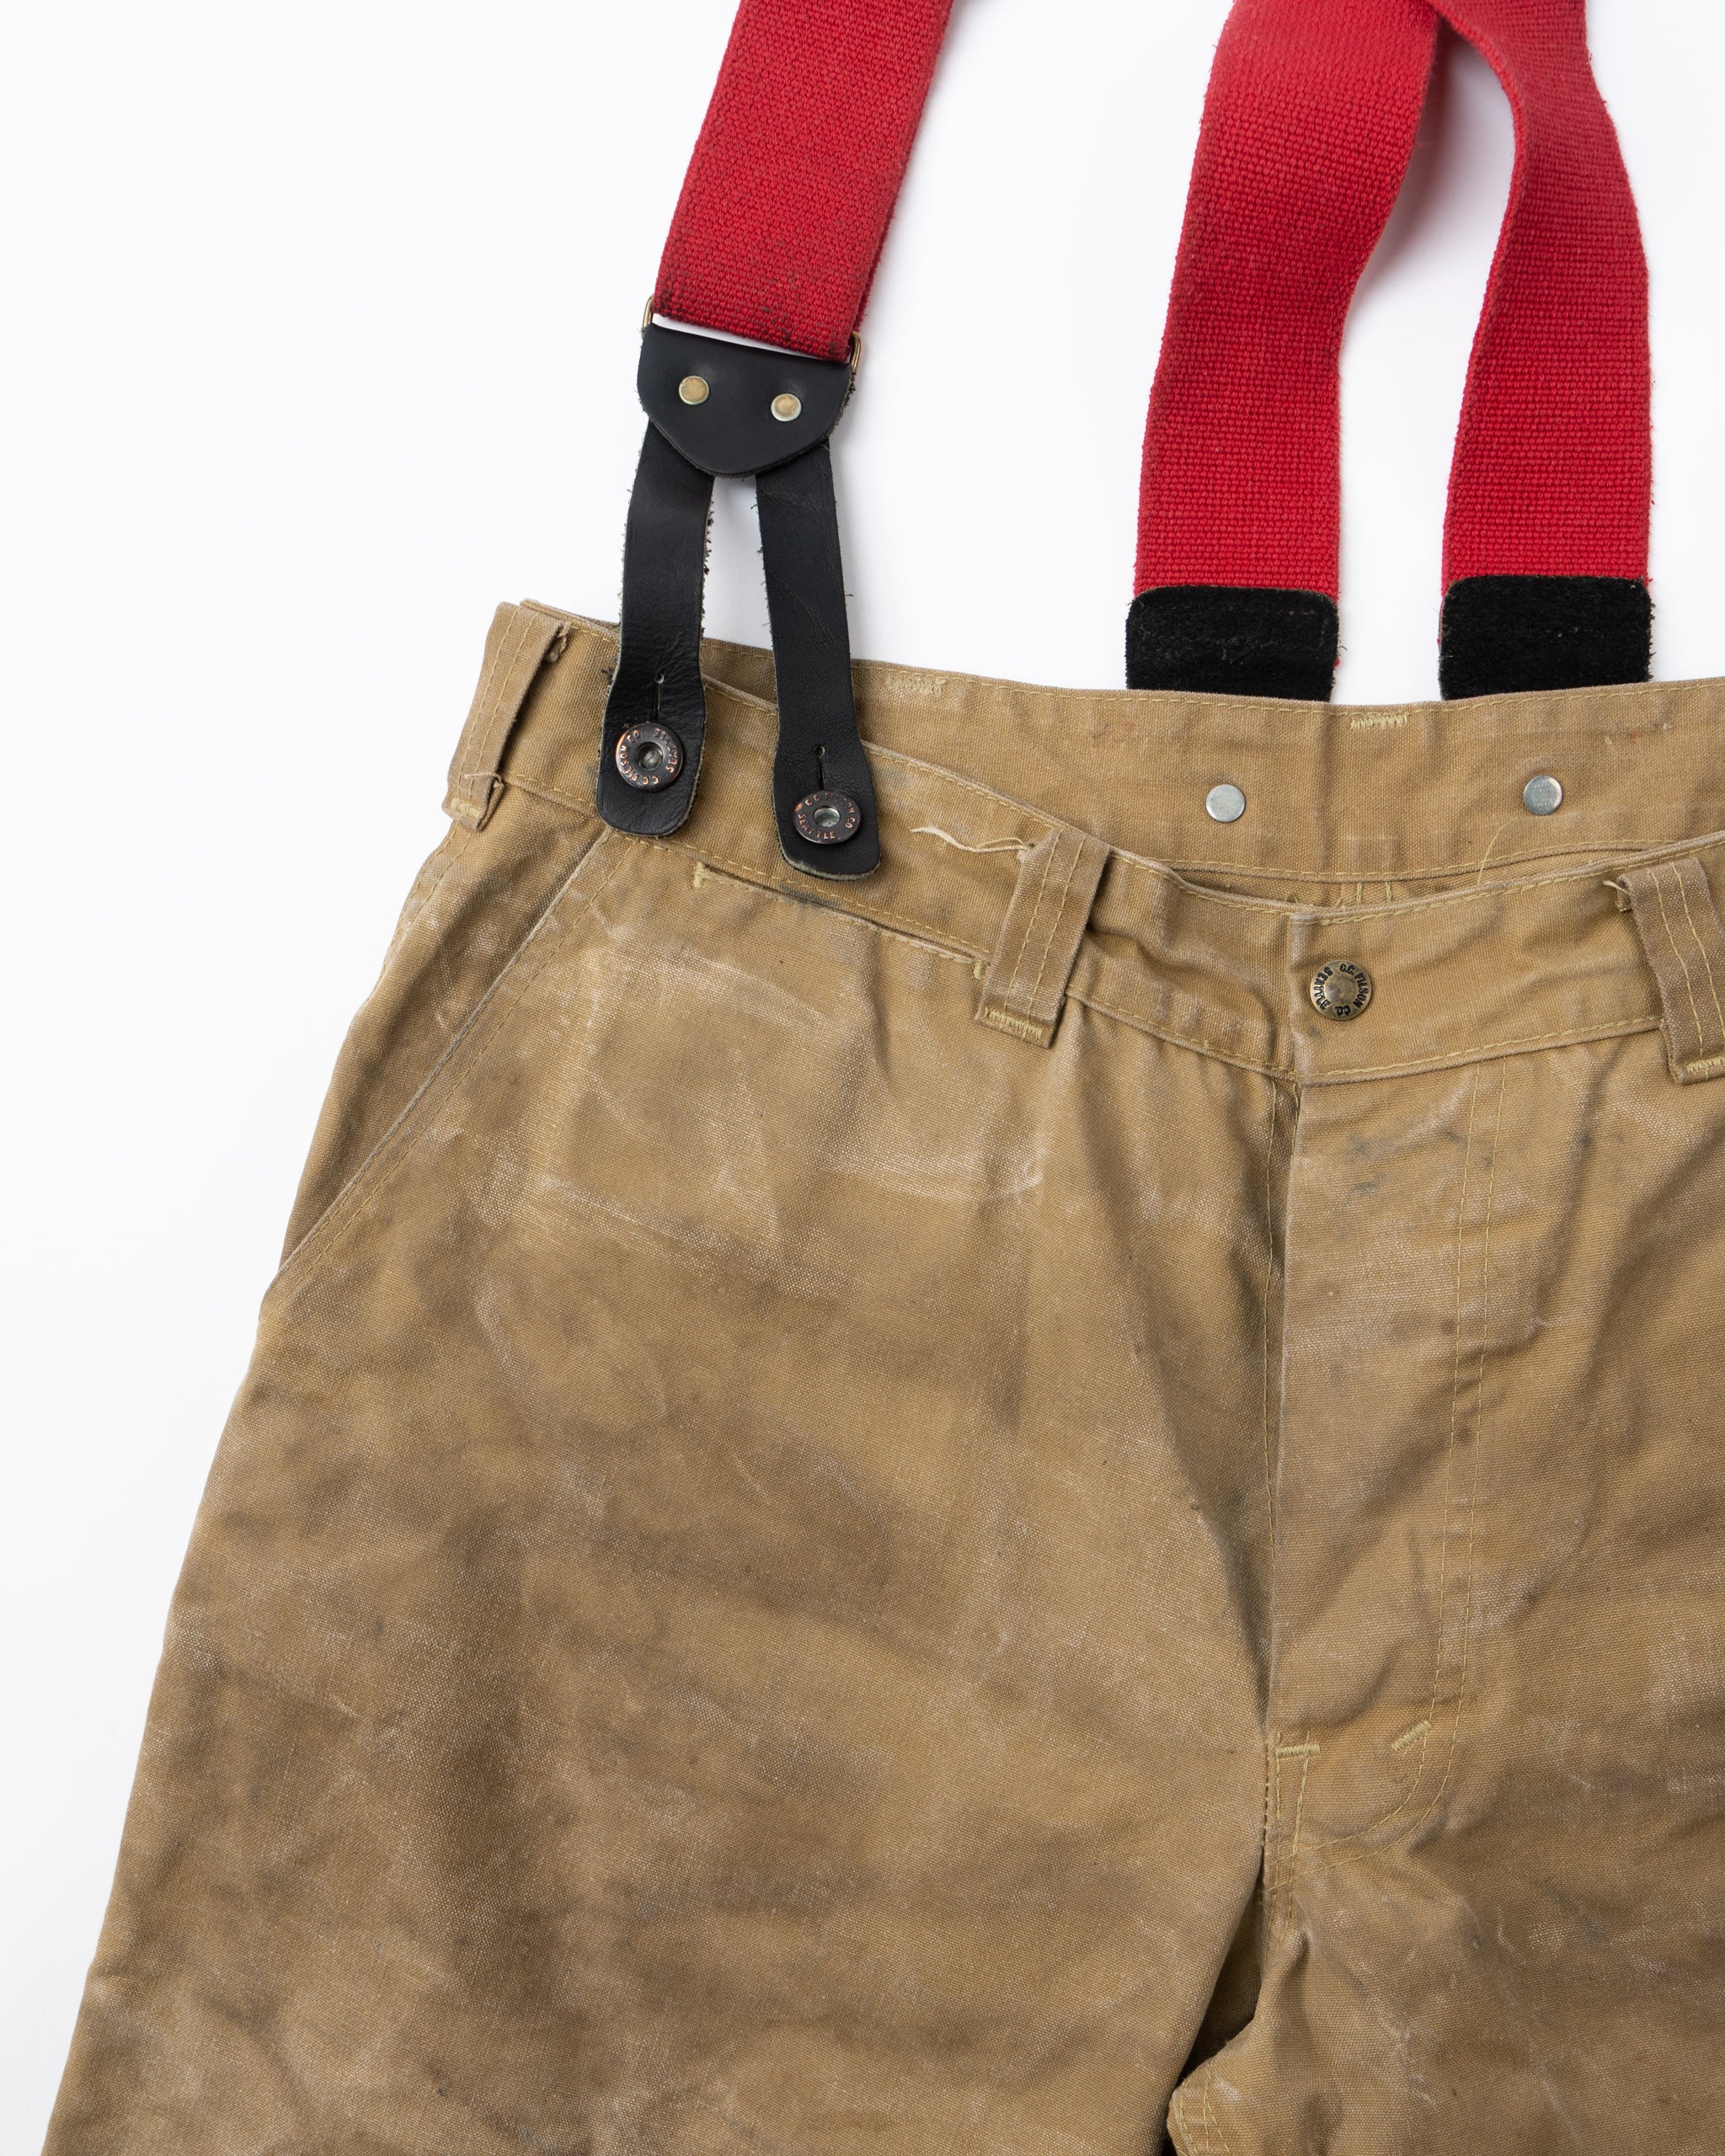 OIL FINISH DOUBLE TIN CLOTH PANTS - clothing & accessories - by owner -  apparel sale - craigslist